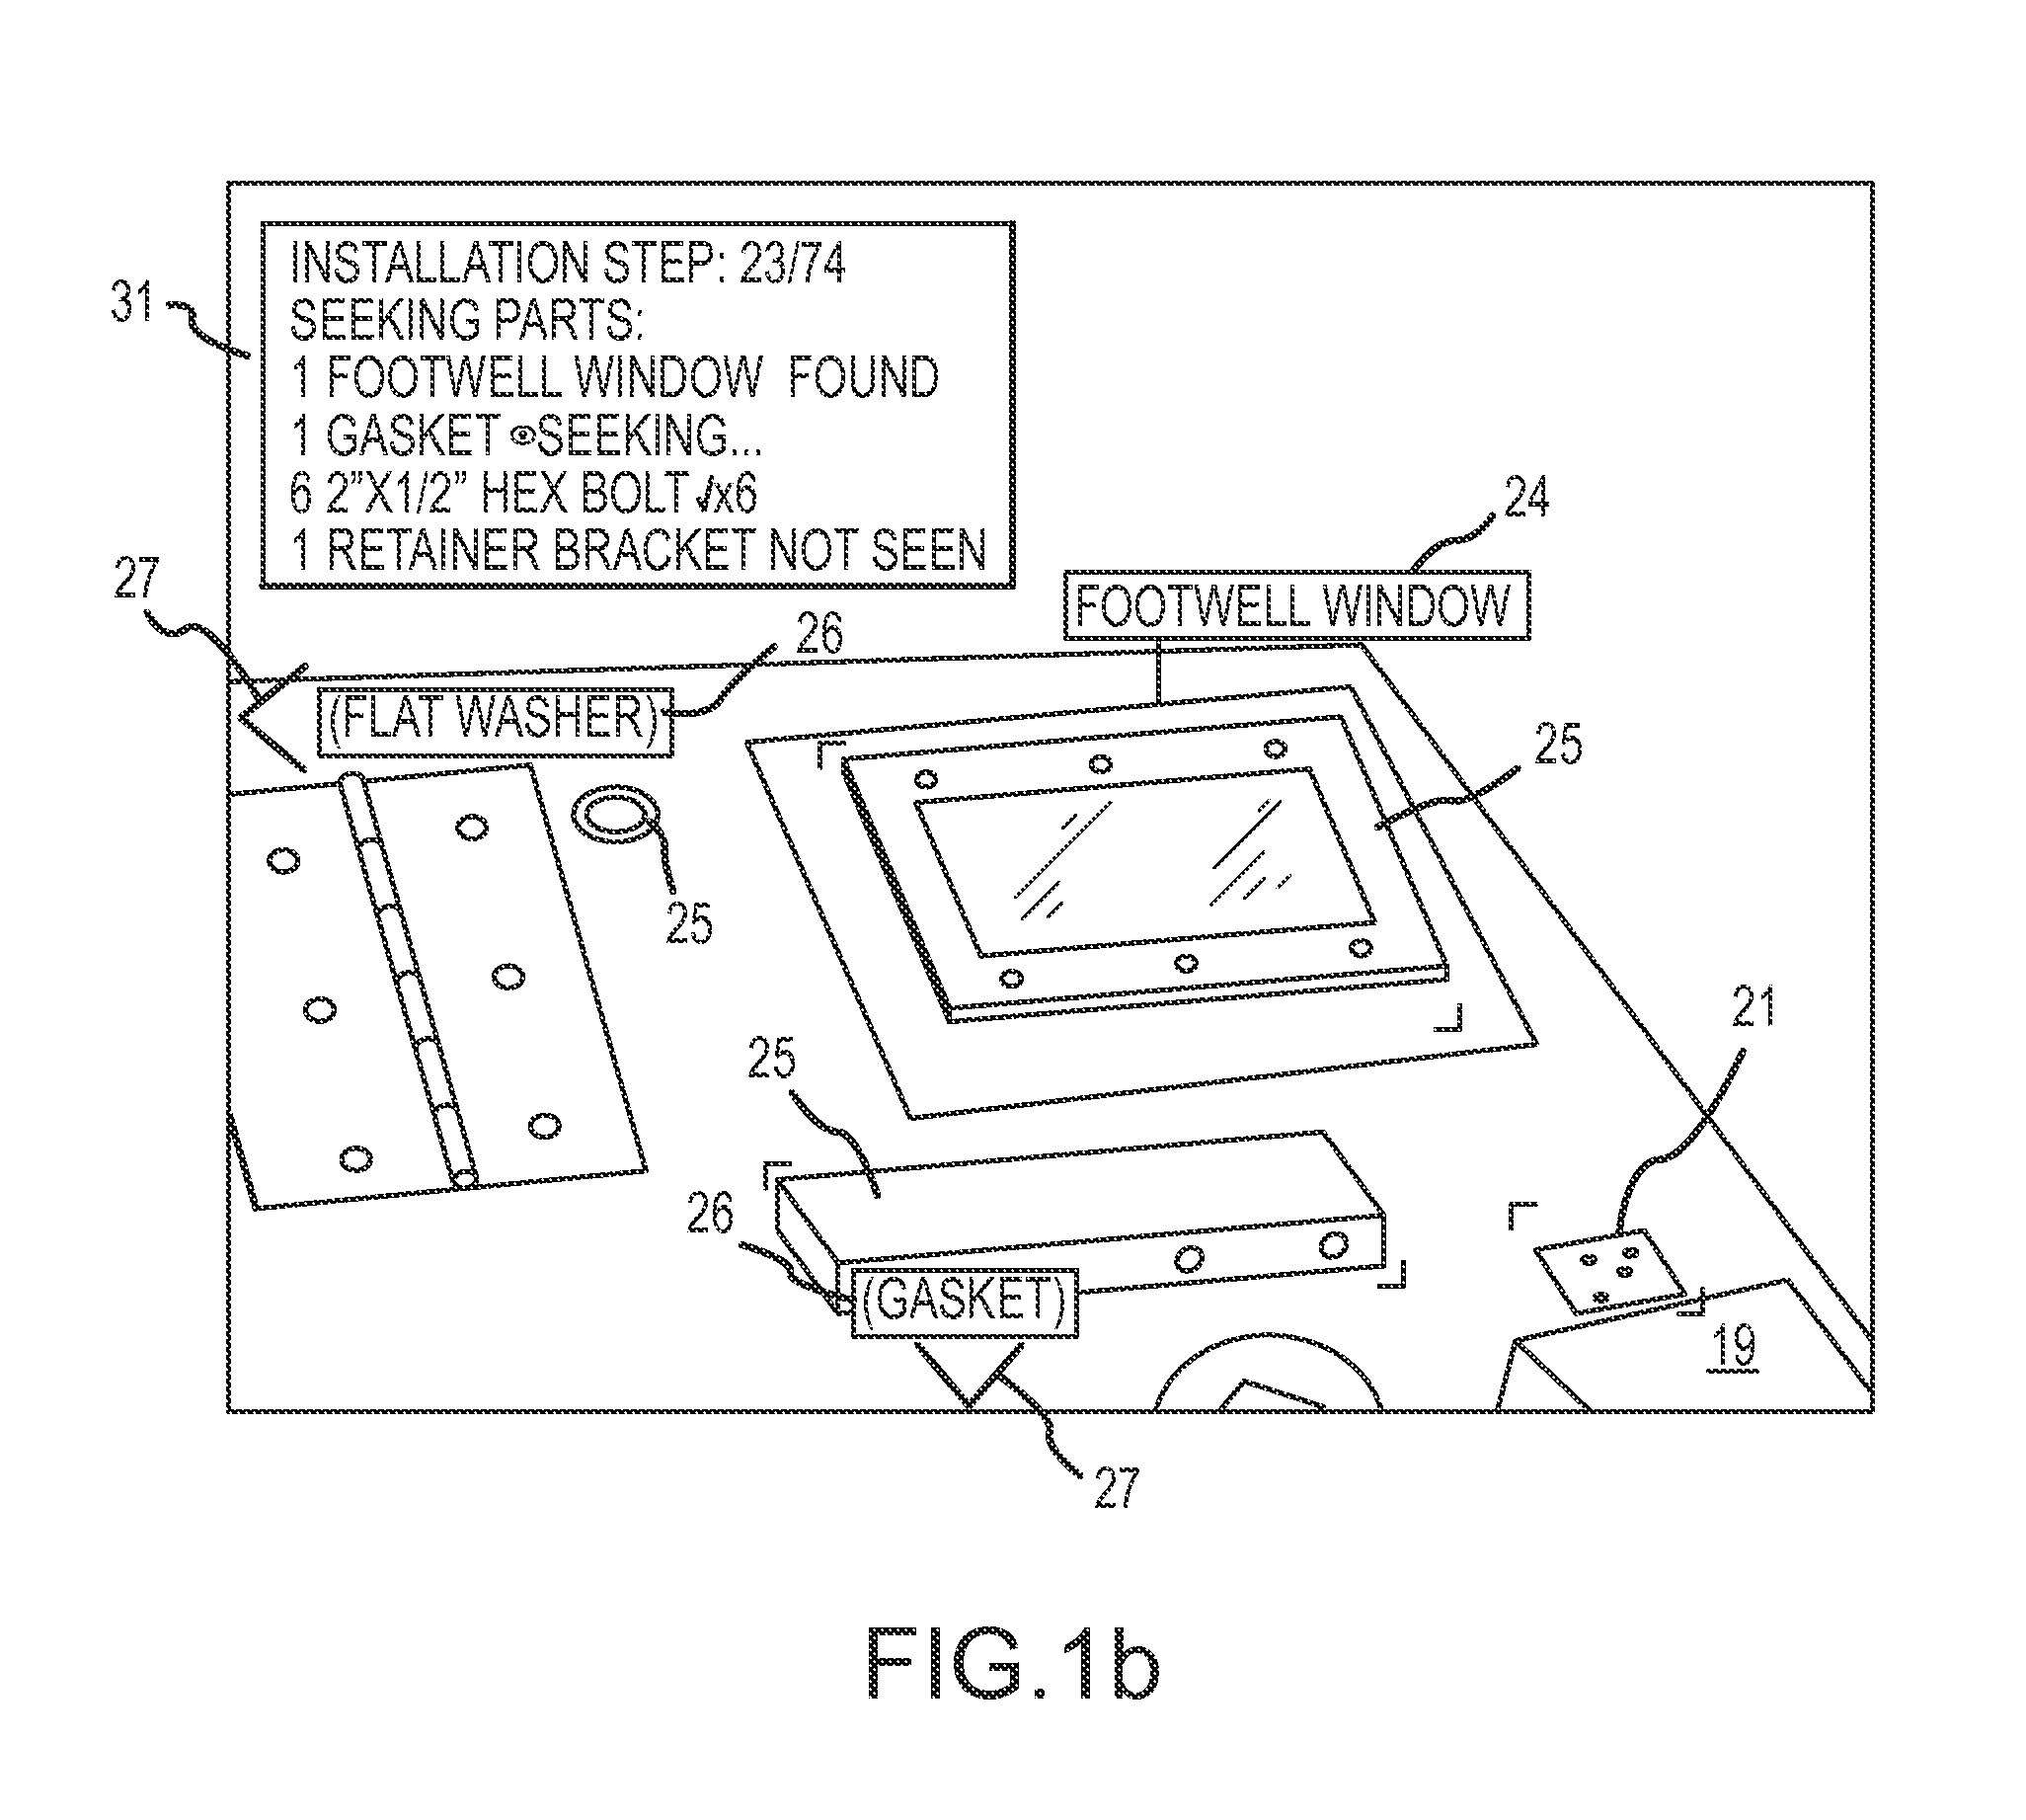 Augmented reality (AR) system and method for tracking parts and visually cueing a user to identify and locate parts in a scene